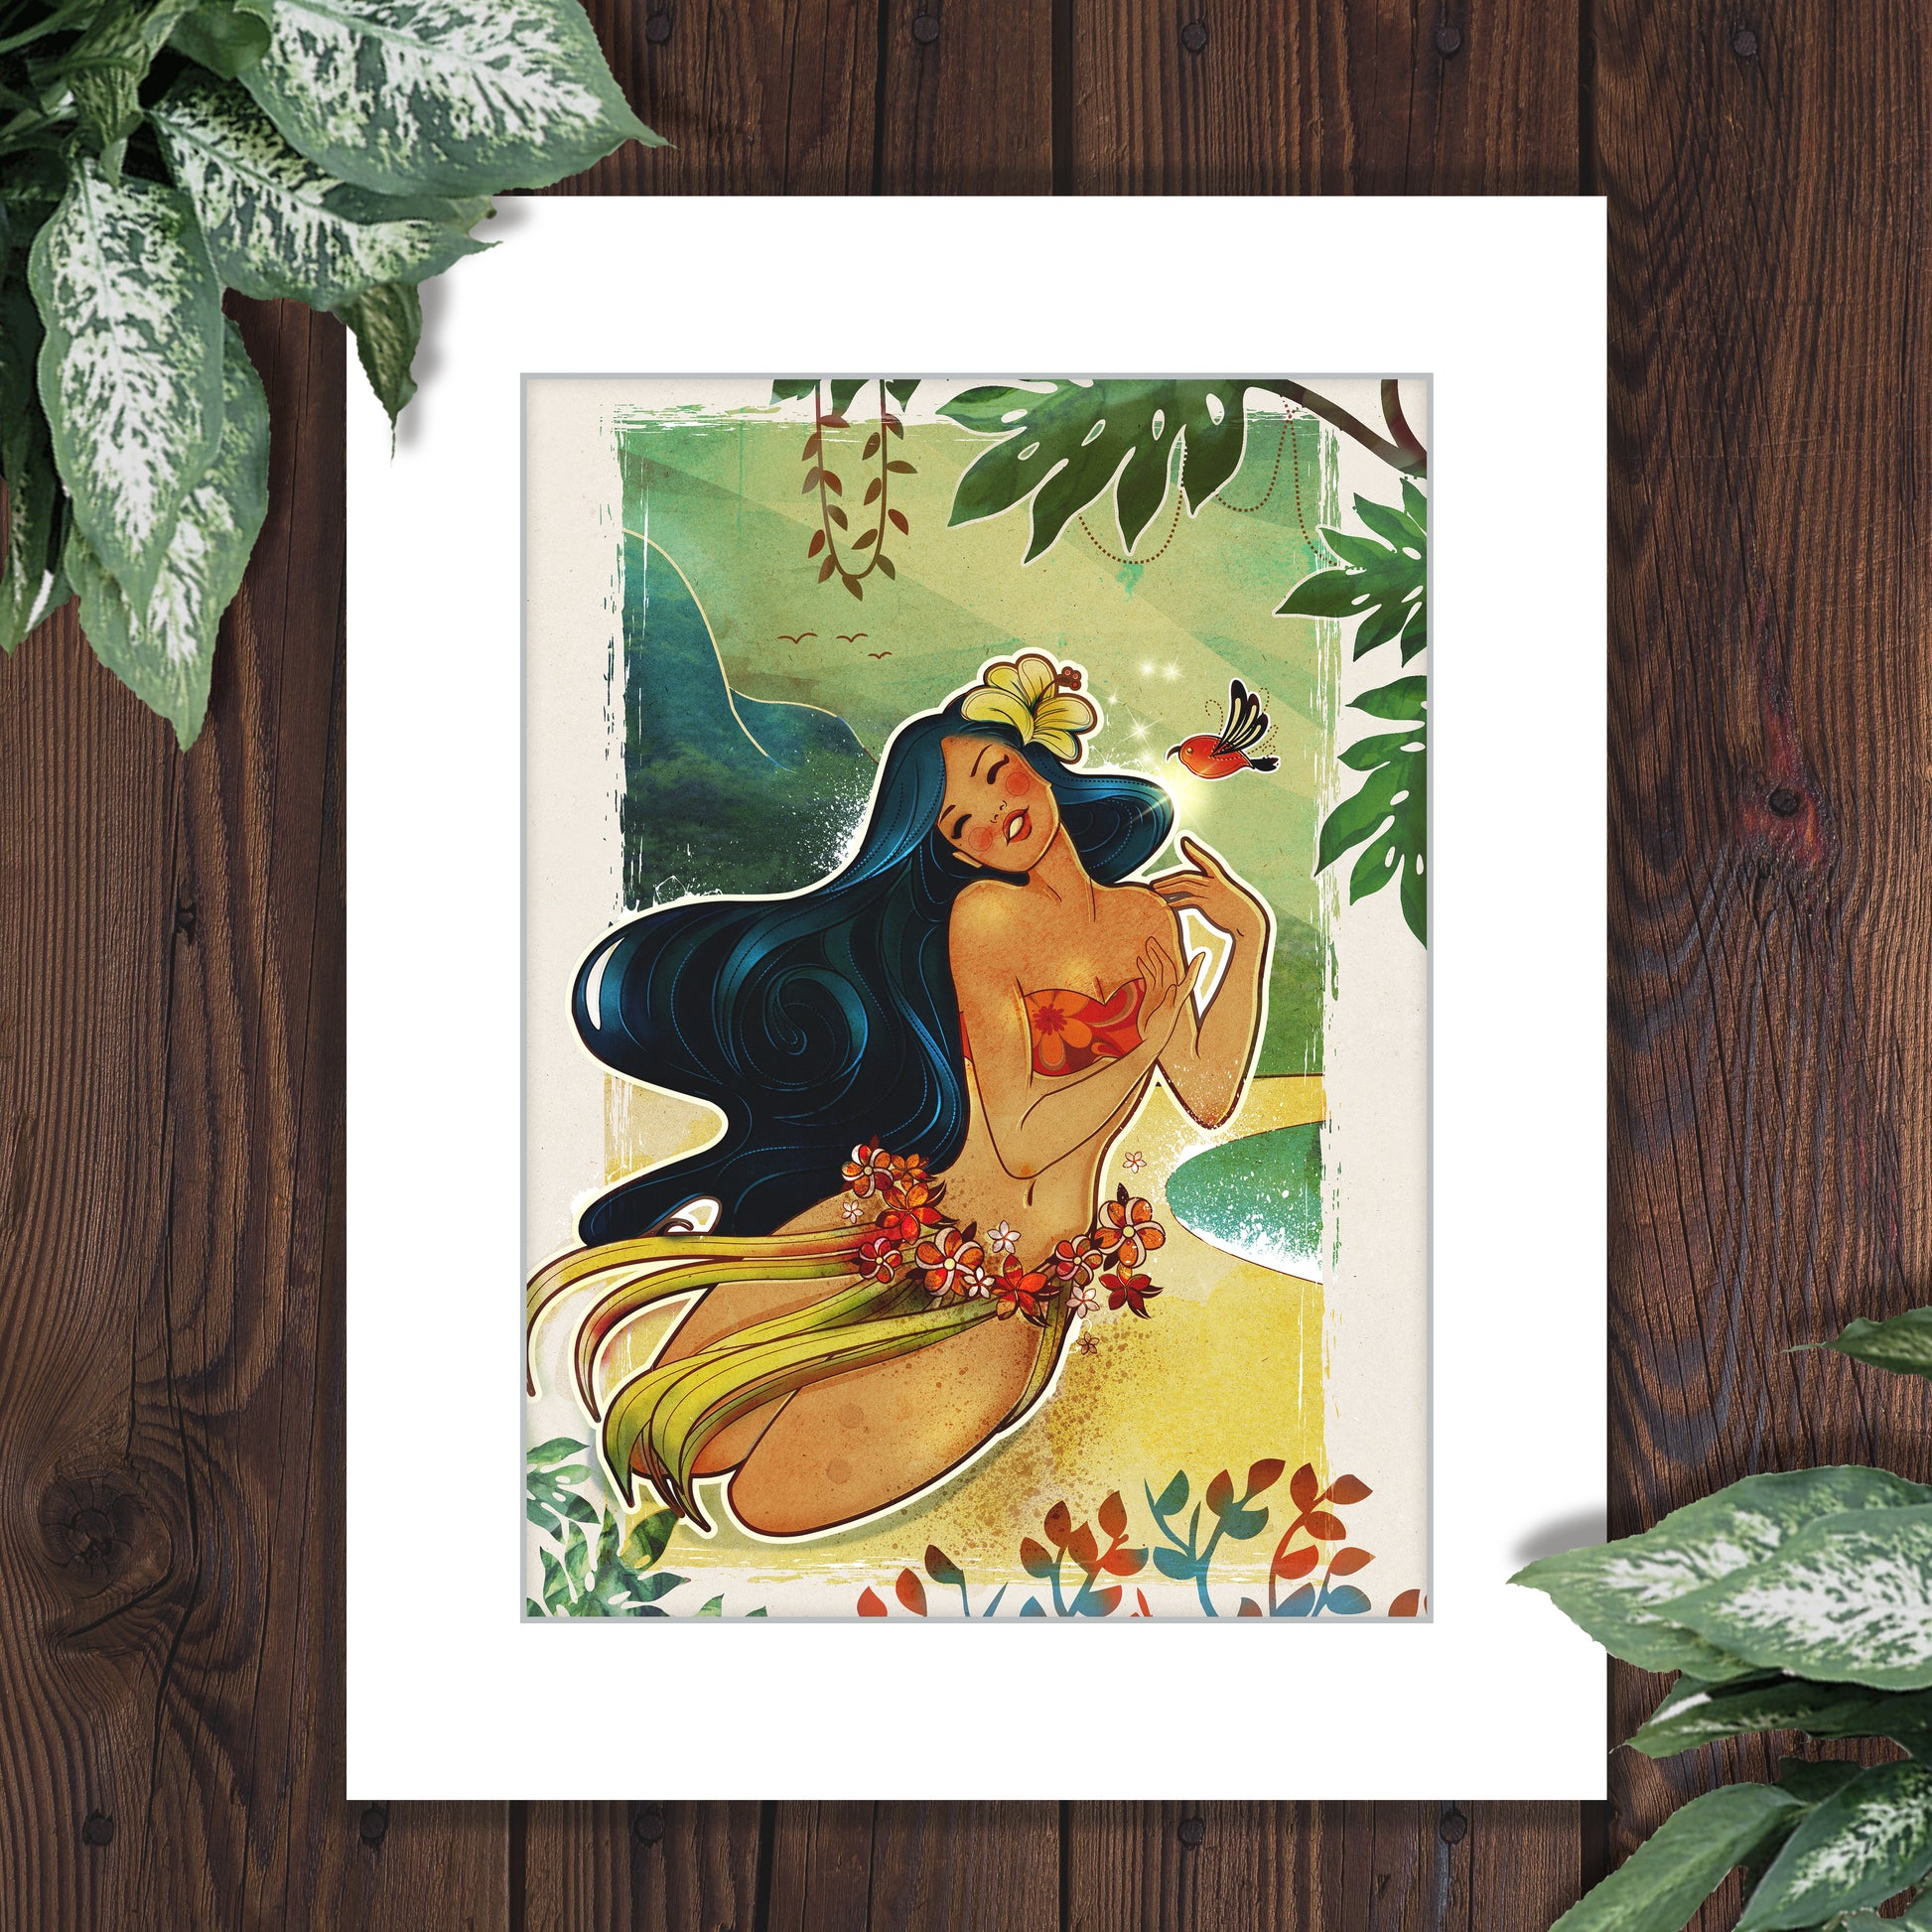 an 11x14 matted print of a hawaiian girl on a beach being kissed by a red bird native to Hawaii, in the style of vintage travel posters. 